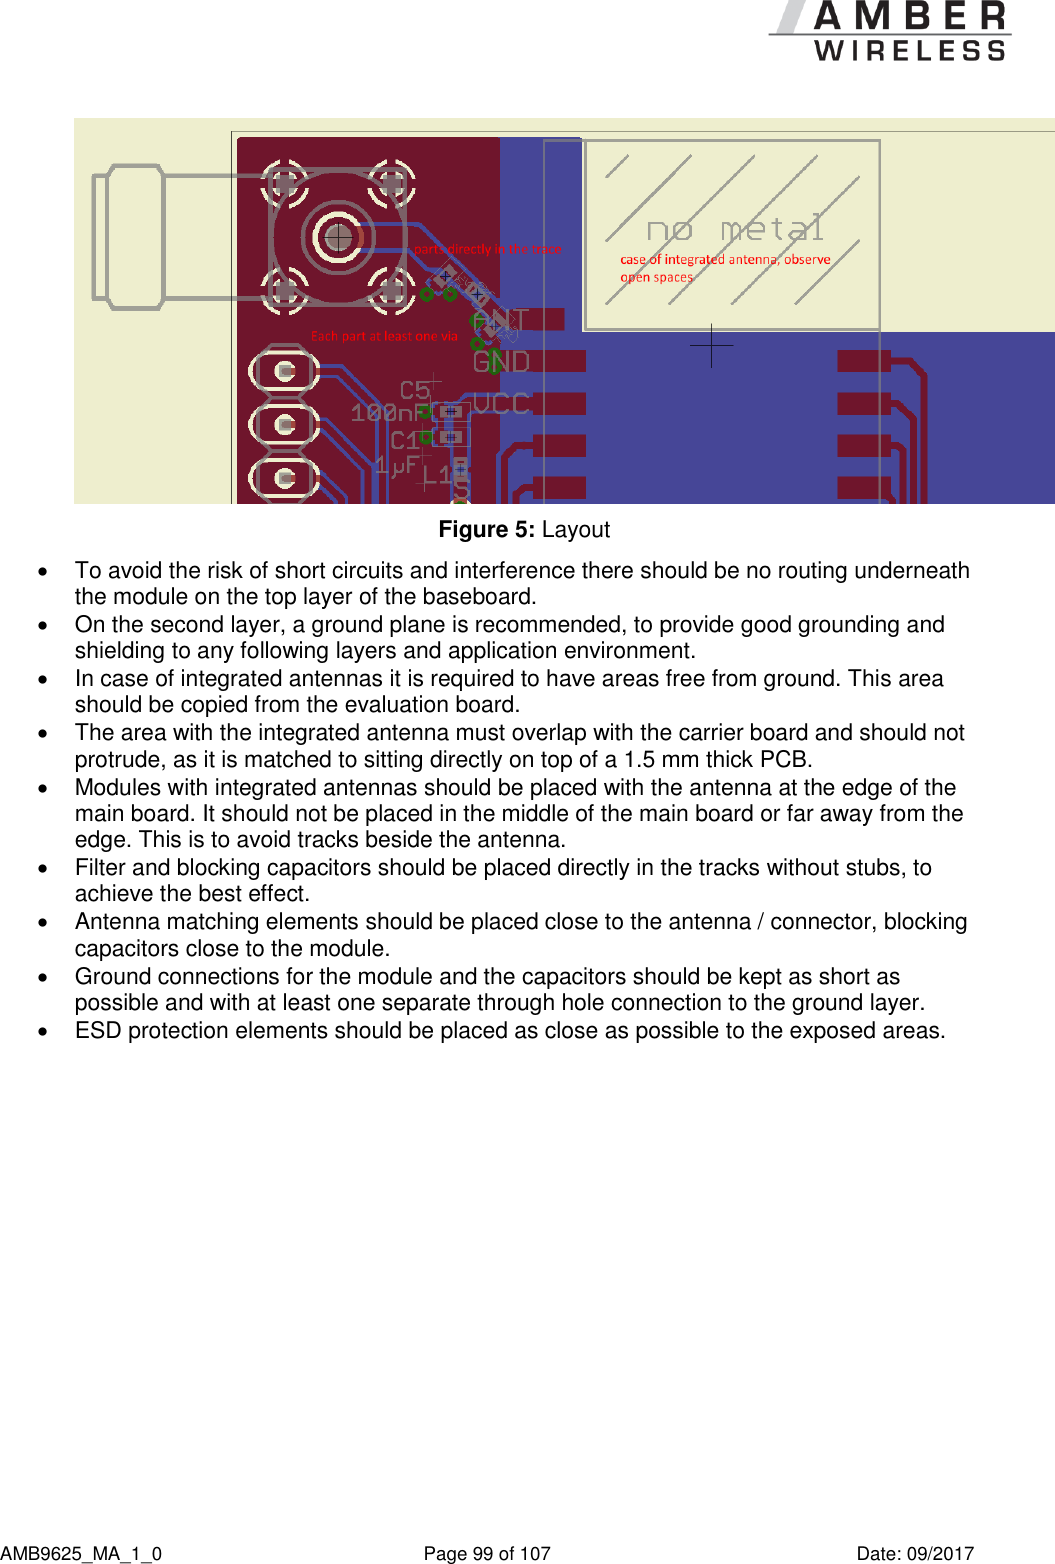      AMB9625_MA_1_0  Page 99 of 107  Date: 09/2017  Figure 5: Layout   To avoid the risk of short circuits and interference there should be no routing underneath the module on the top layer of the baseboard.   On the second layer, a ground plane is recommended, to provide good grounding and shielding to any following layers and application environment.    In case of integrated antennas it is required to have areas free from ground. This area should be copied from the evaluation board.   The area with the integrated antenna must overlap with the carrier board and should not protrude, as it is matched to sitting directly on top of a 1.5 mm thick PCB.   Modules with integrated antennas should be placed with the antenna at the edge of the main board. It should not be placed in the middle of the main board or far away from the edge. This is to avoid tracks beside the antenna.    Filter and blocking capacitors should be placed directly in the tracks without stubs, to achieve the best effect.   Antenna matching elements should be placed close to the antenna / connector, blocking capacitors close to the module.   Ground connections for the module and the capacitors should be kept as short as possible and with at least one separate through hole connection to the ground layer.   ESD protection elements should be placed as close as possible to the exposed areas.  